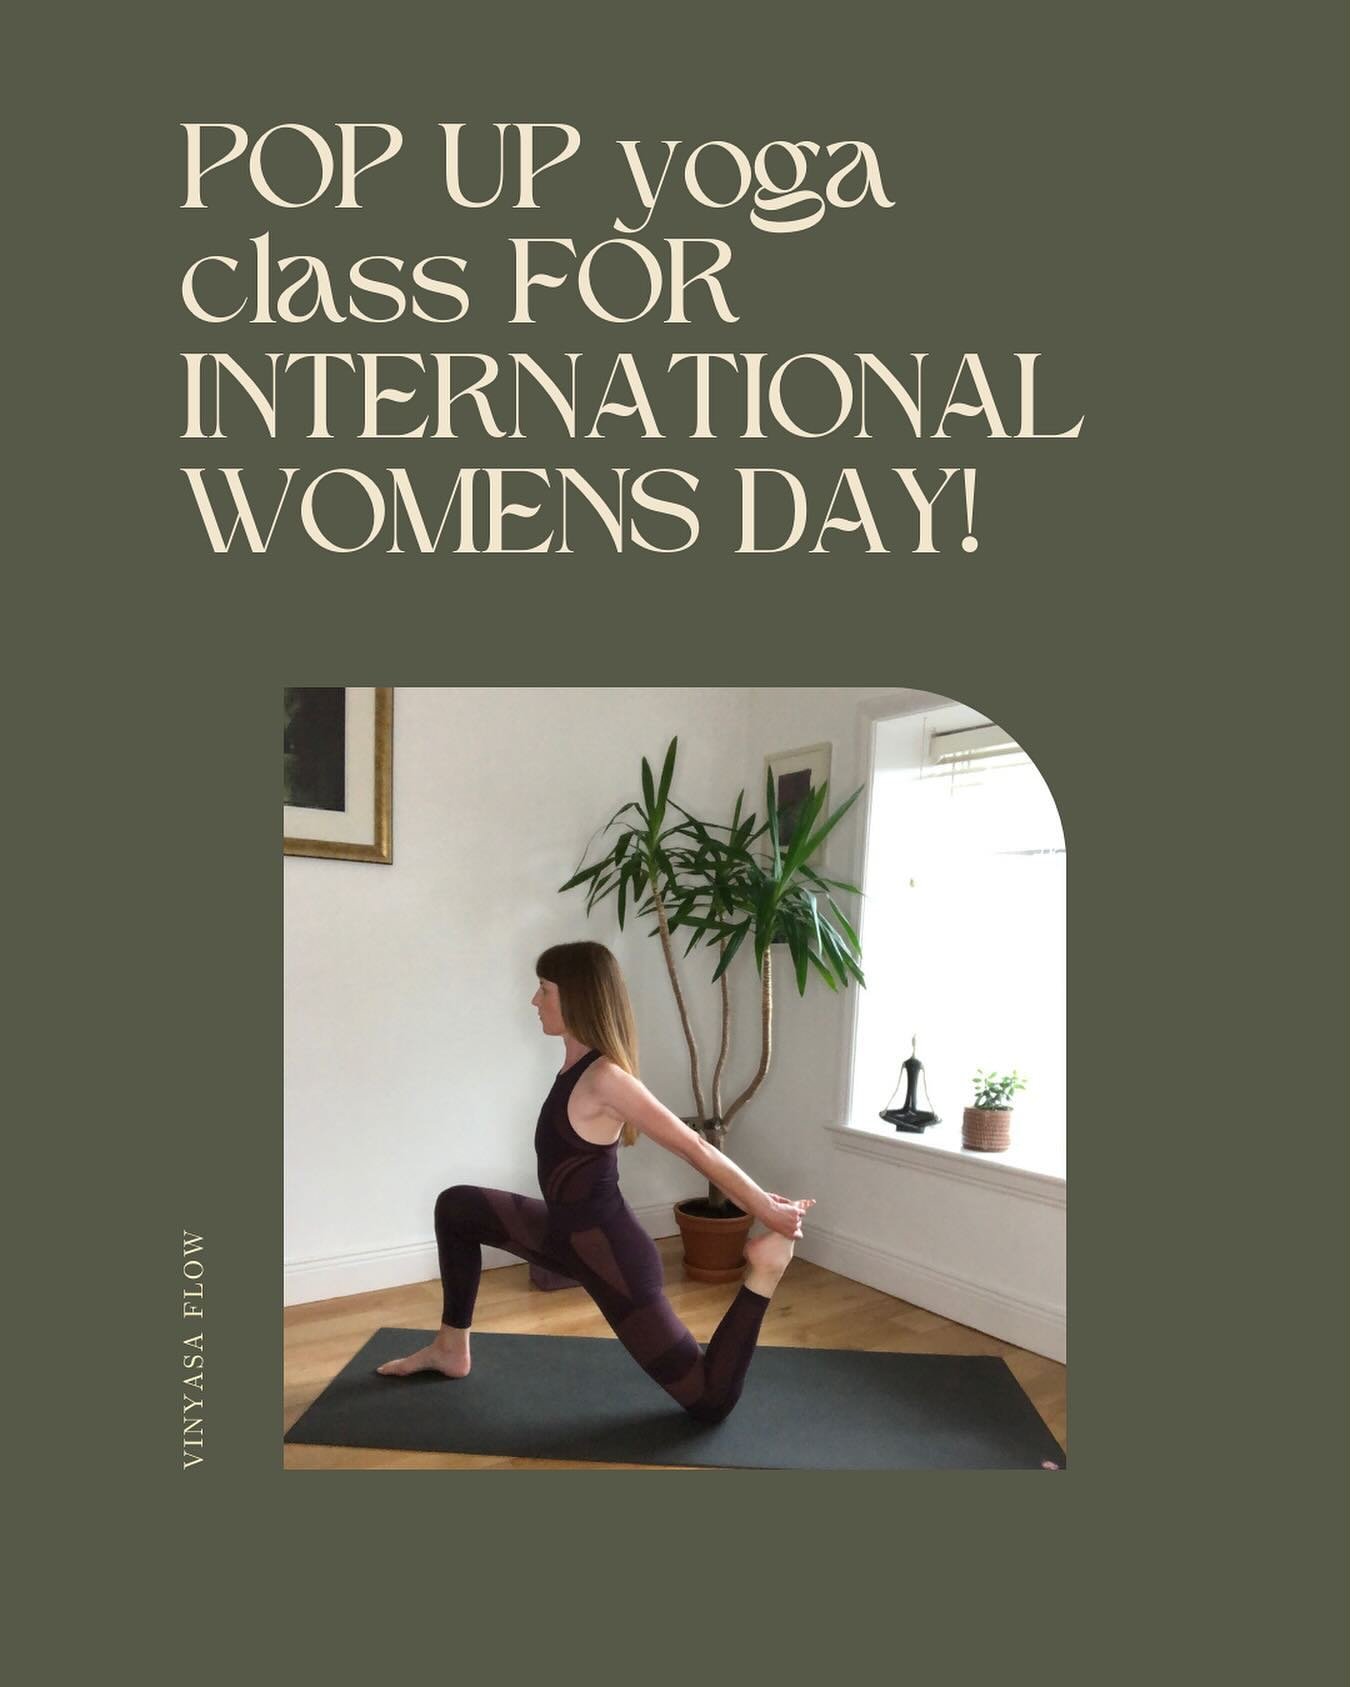 .
Don&rsquo;t miss a special POP UP Friday Yoga class to celebrate International Women&rsquo;s Day. Come and practice together on Friday March 8th at 6pm in An Seomra Yoga, Small Crane, Galway.

I believe when we show up for ourself we inevitably sho